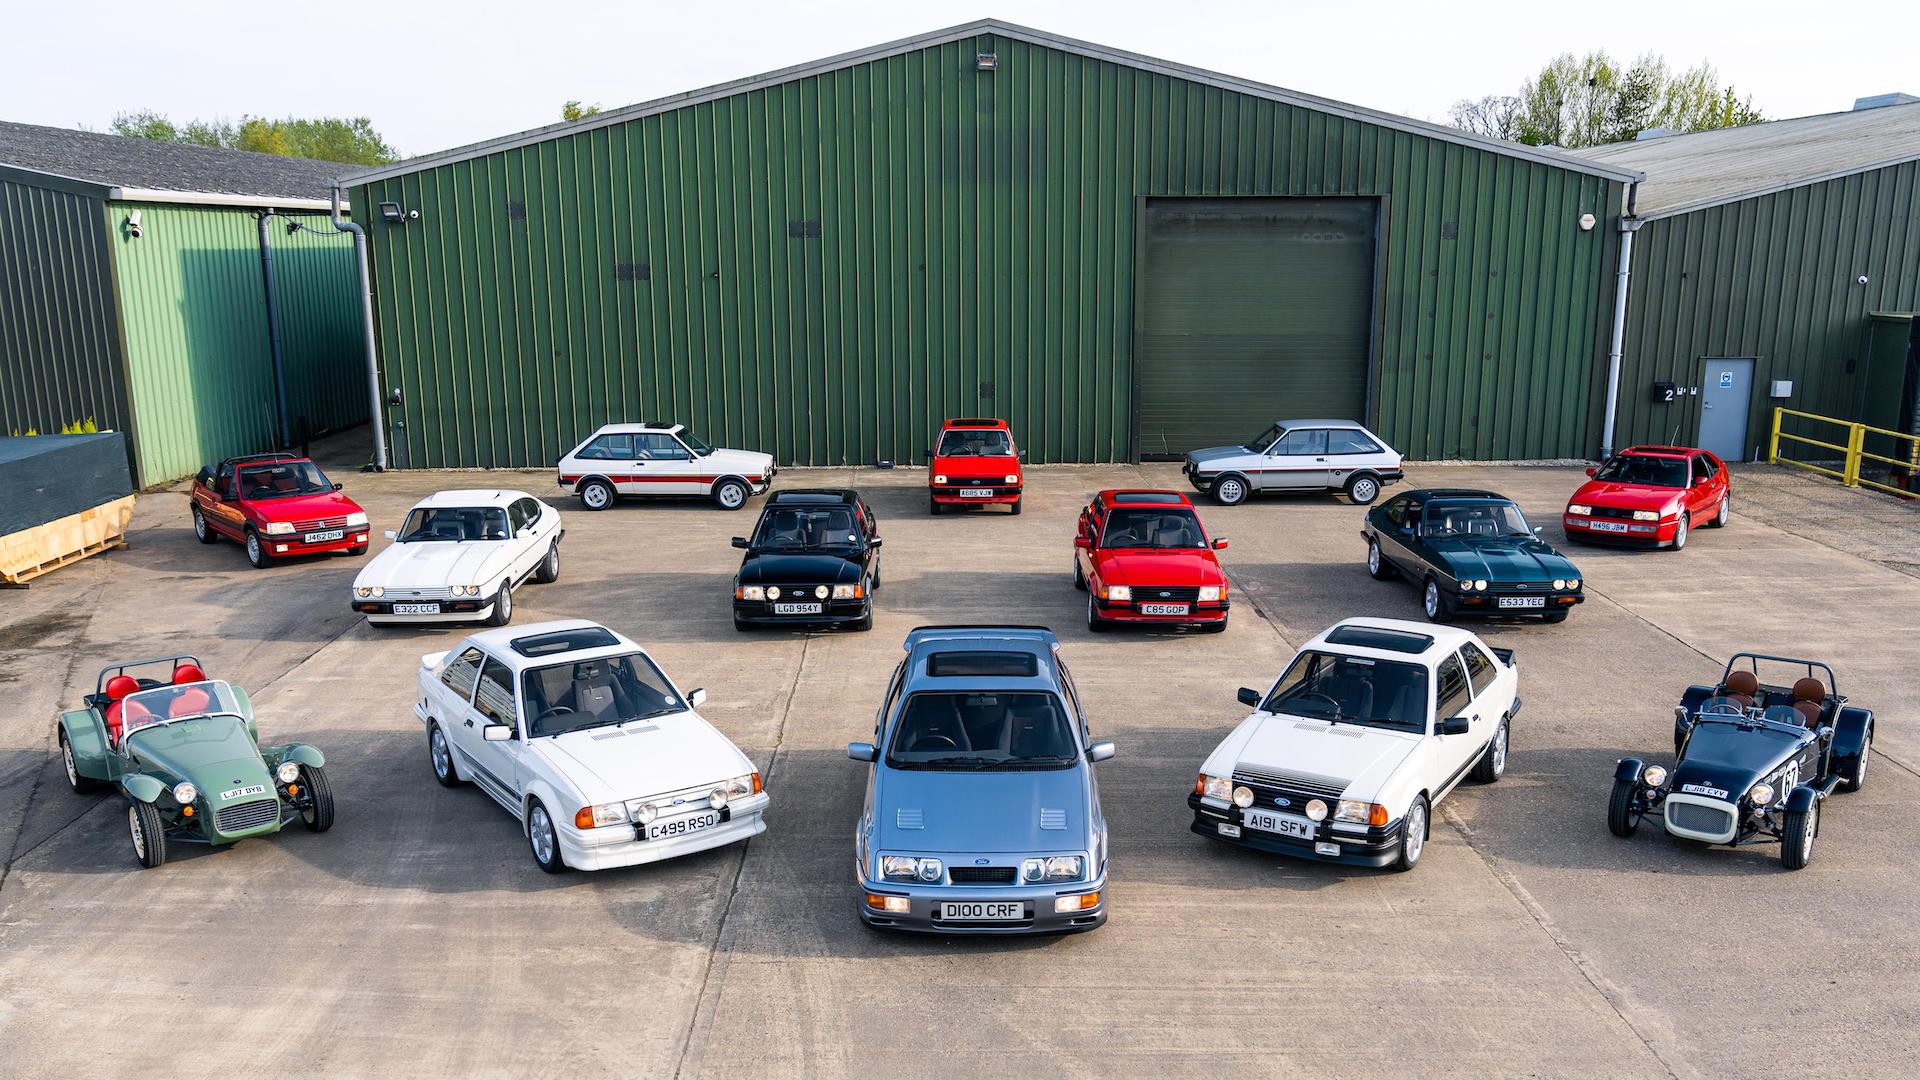 Revealed: auction prices for amazing collection of fast Fords